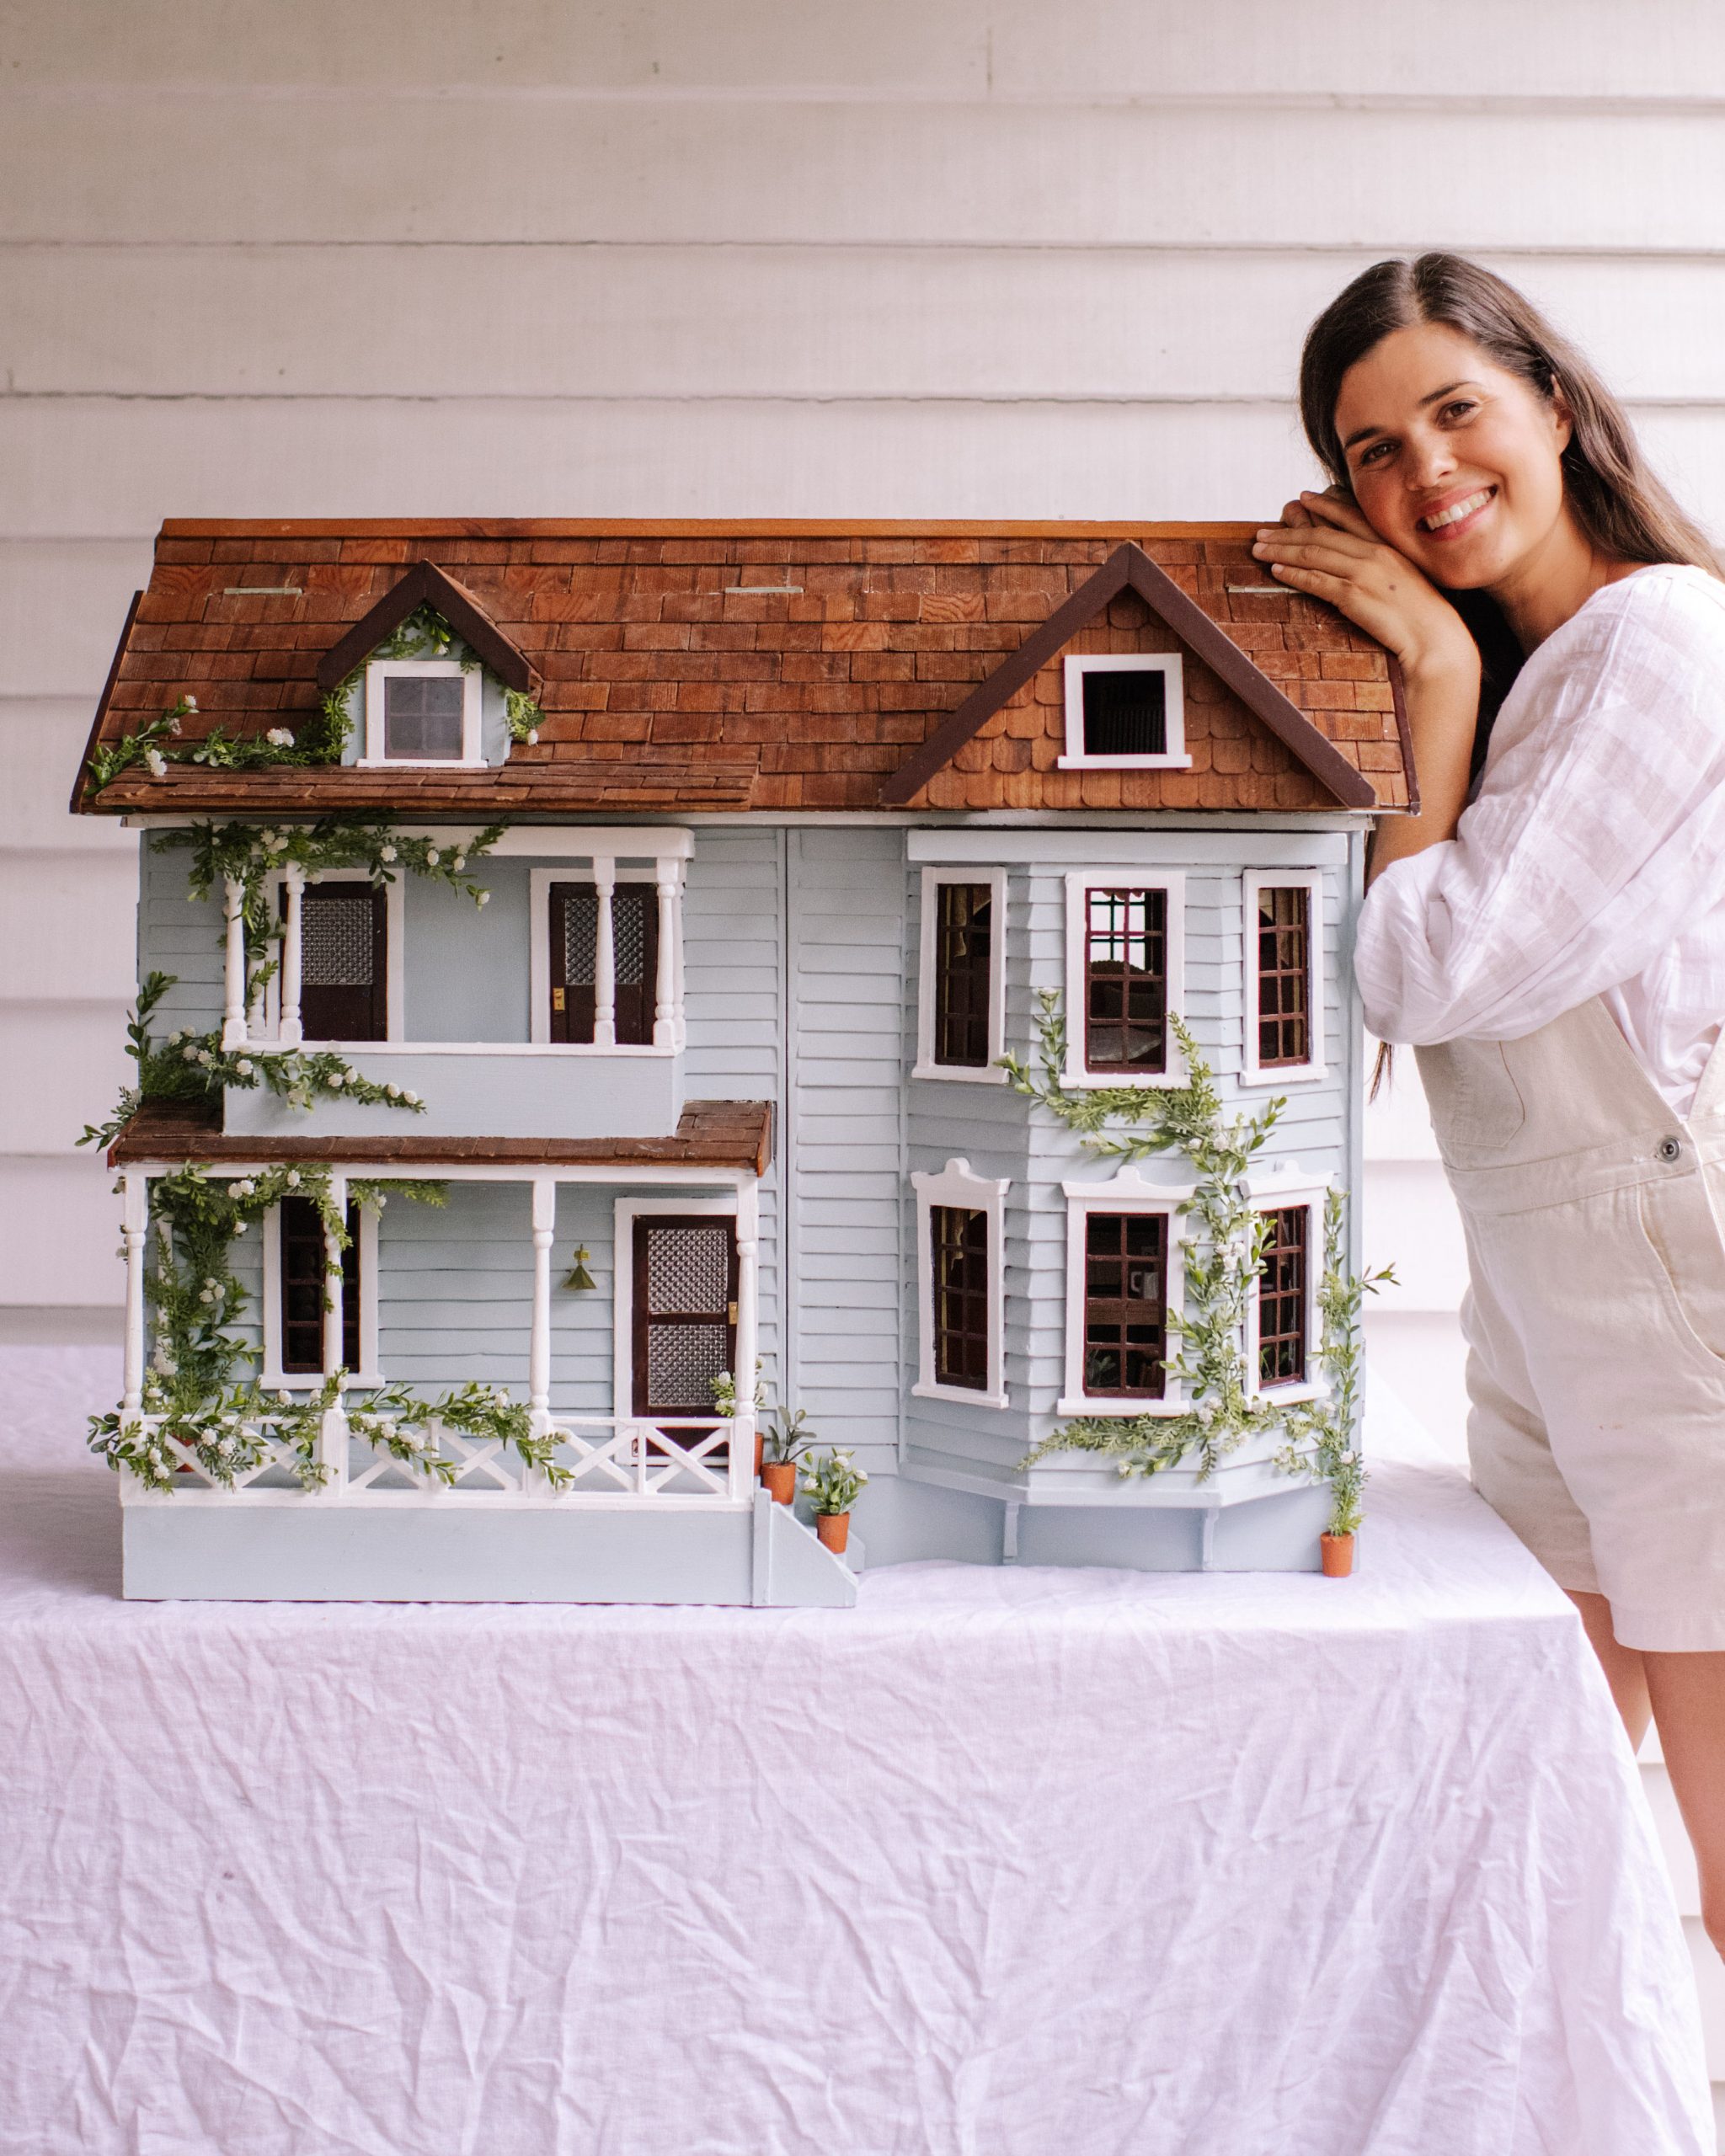 I bought an vintage dollhouse, let's renovate it together! What should, Dollhouse Makeover